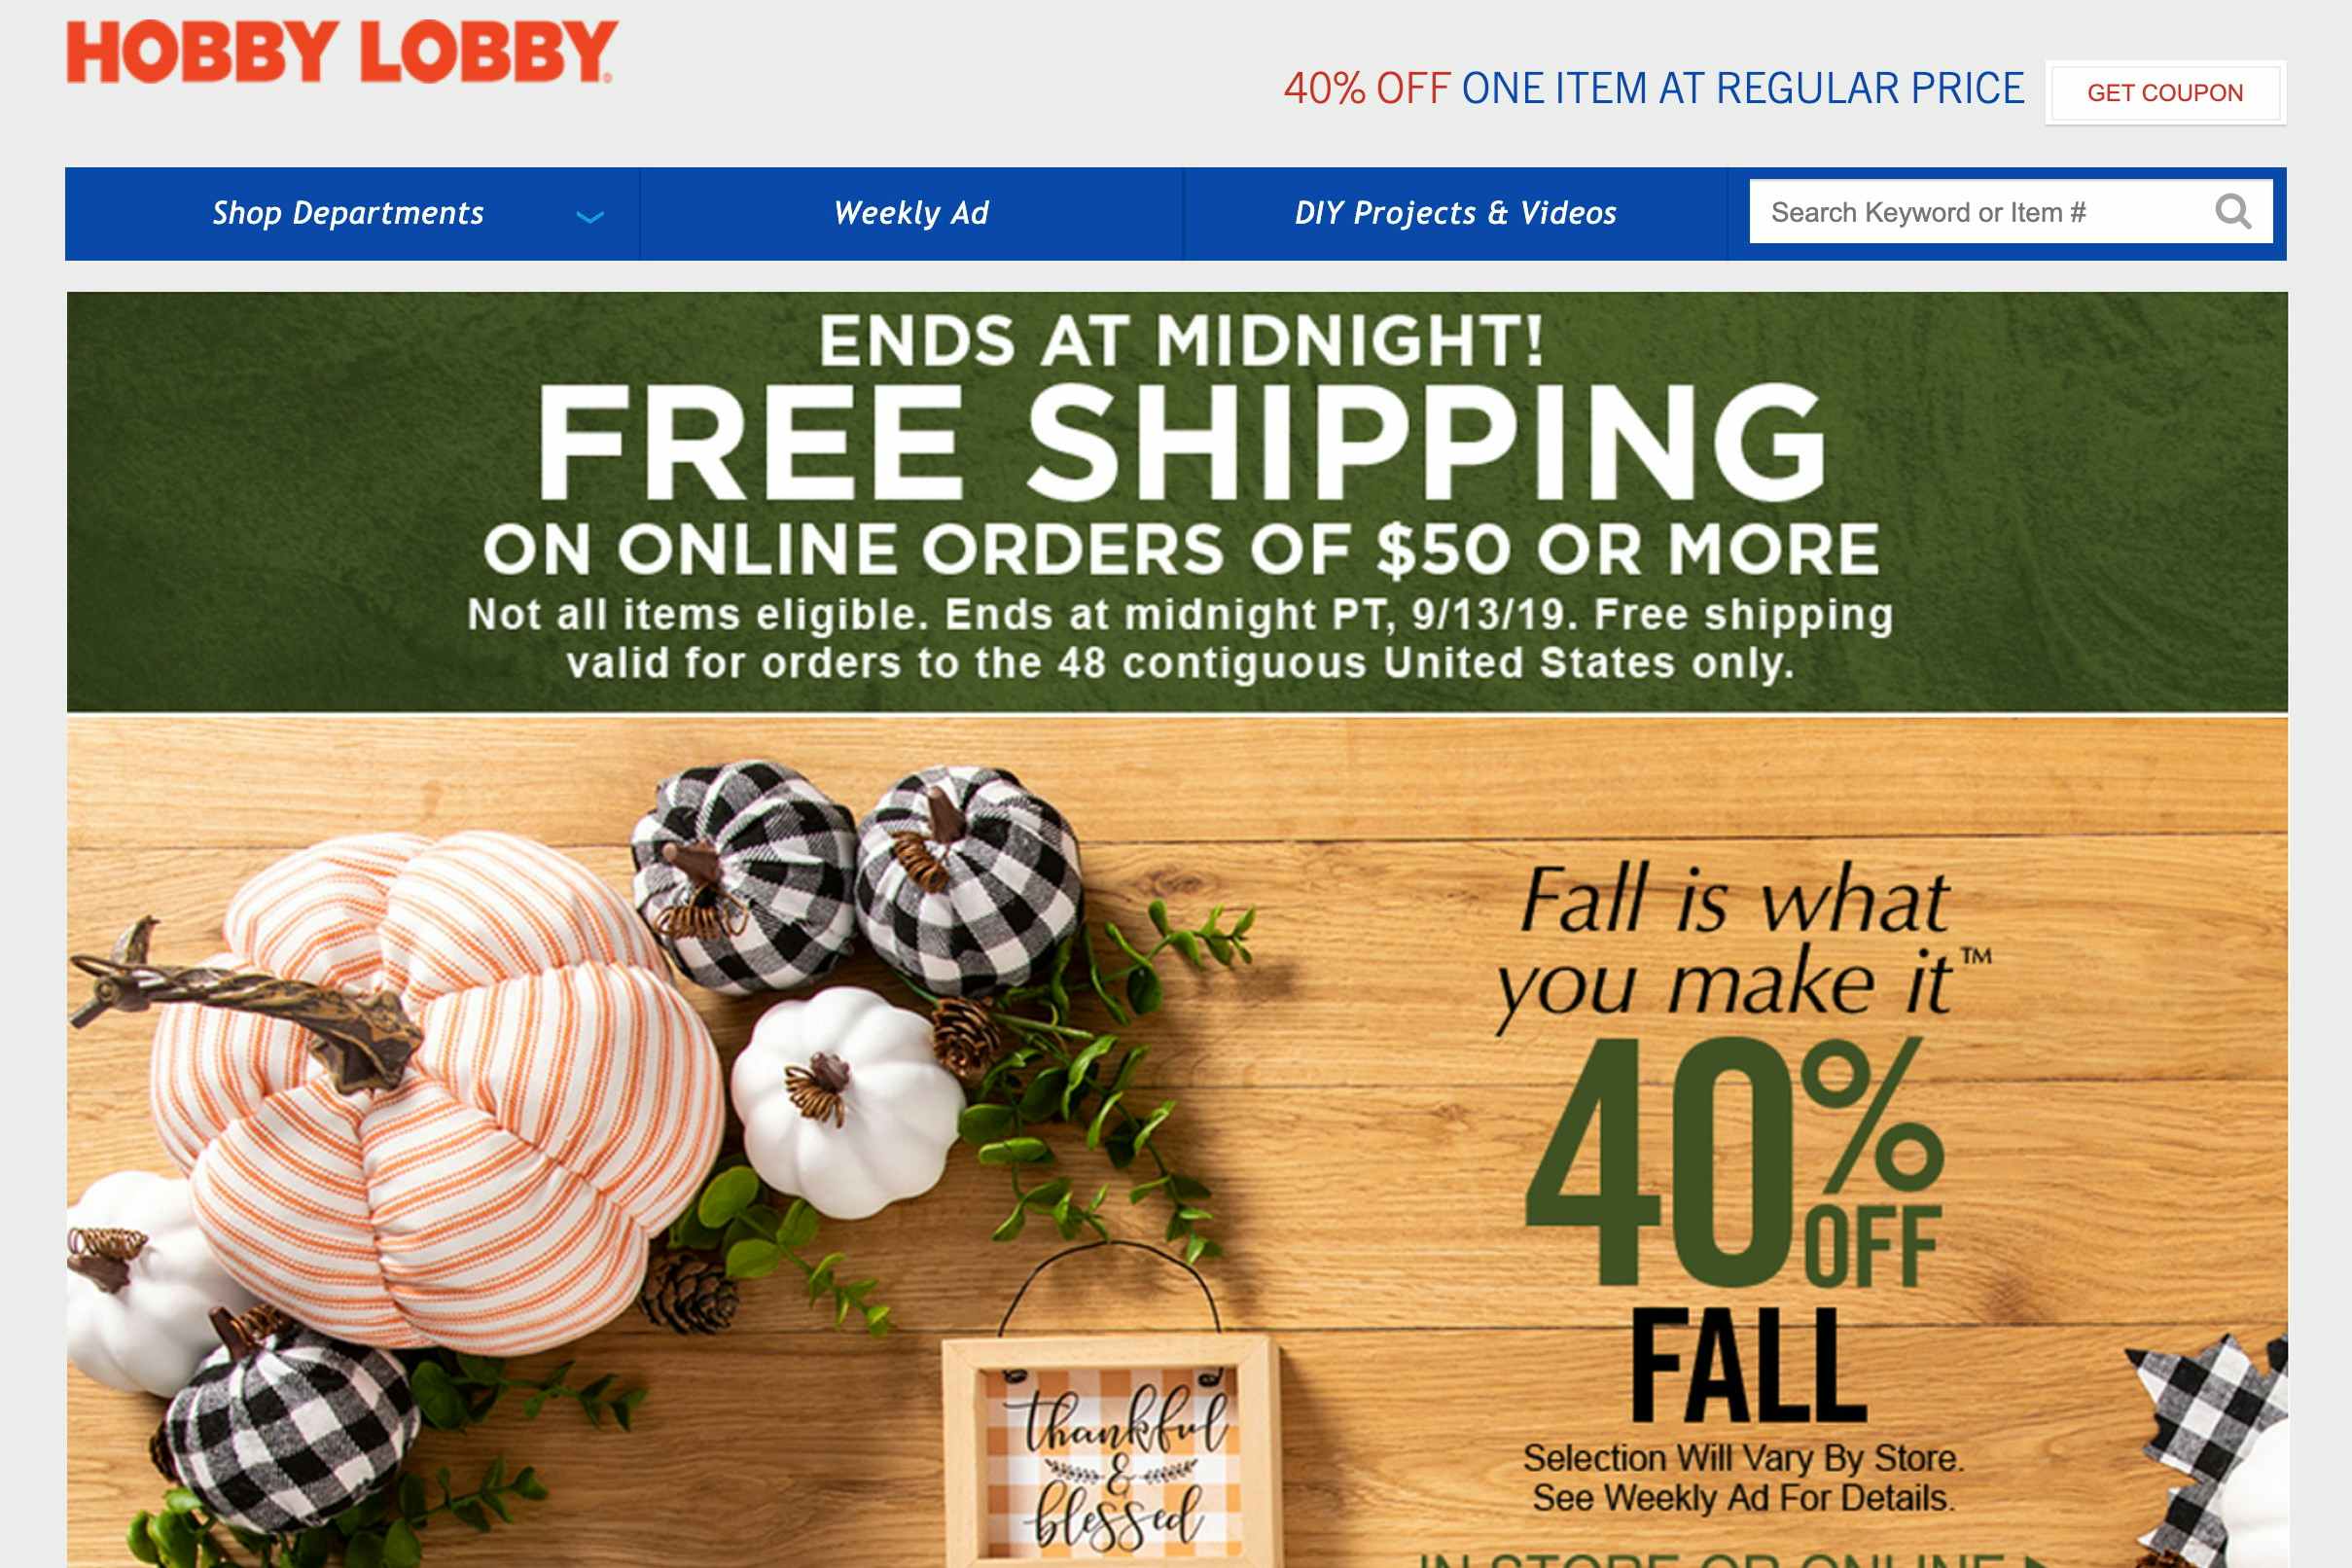 Use These Hobby Lobby Coupon Hacks to Save More Money - The Krazy Coupon  Lady